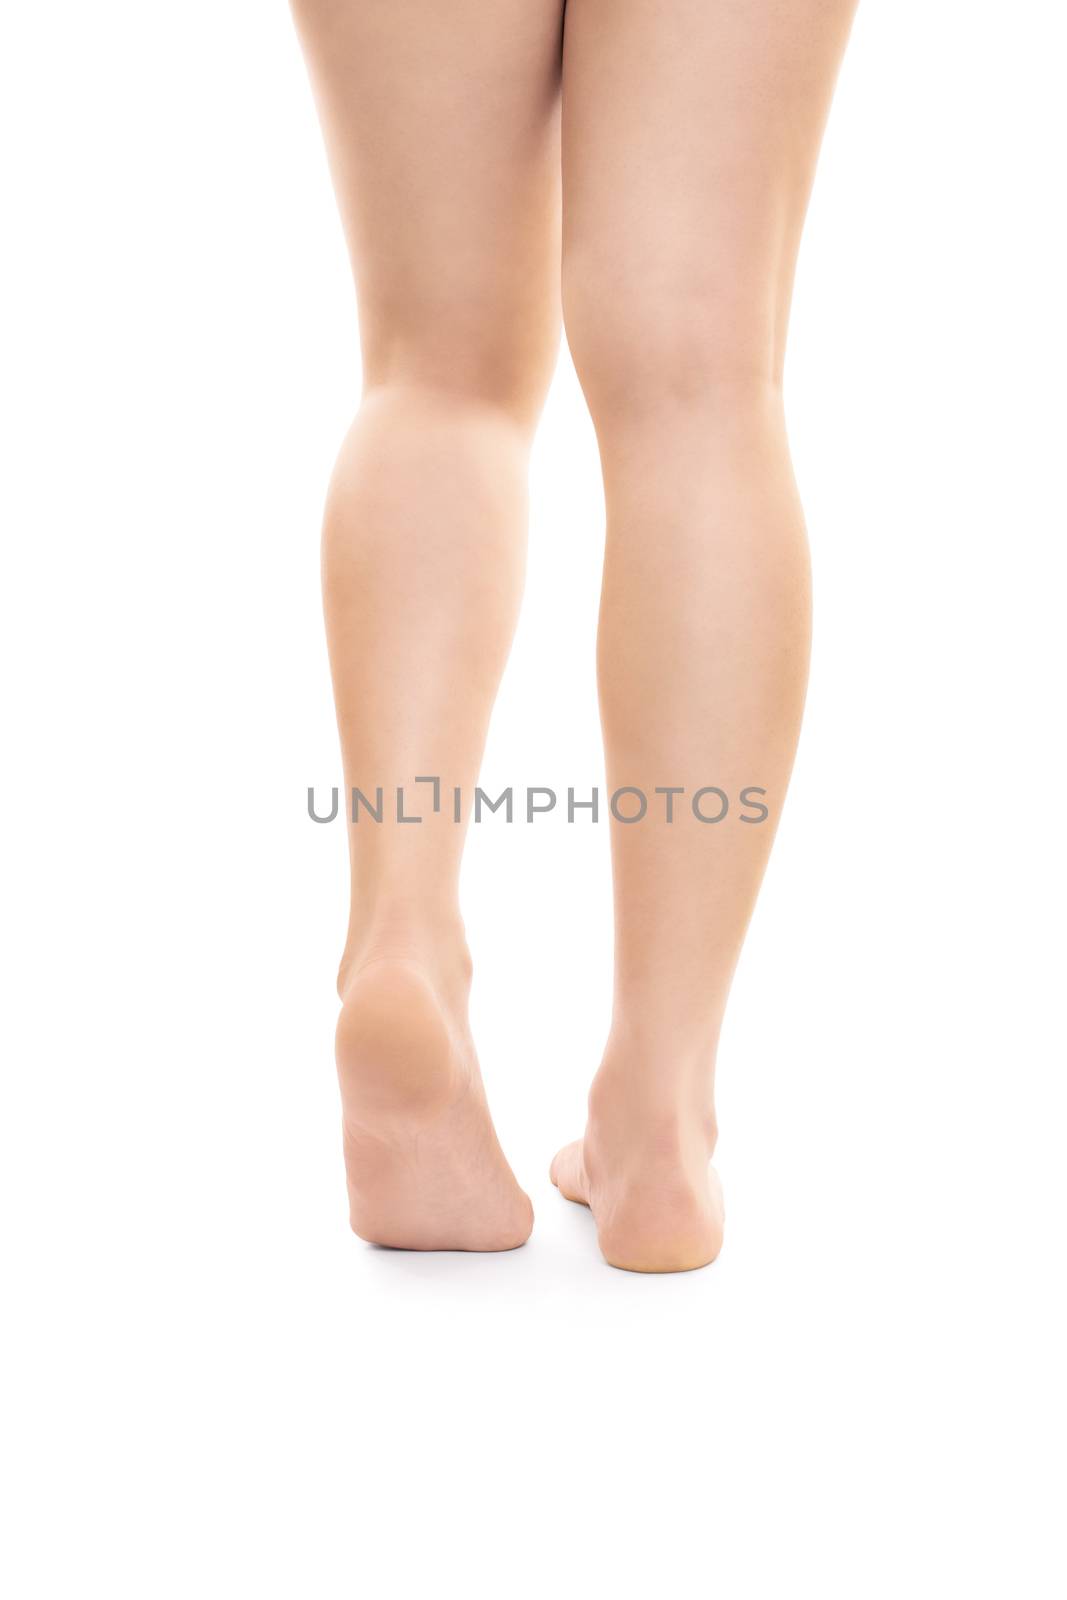 Back shot of smooth beautiful female legs, isolated on white background. Successful hair removal procedure.